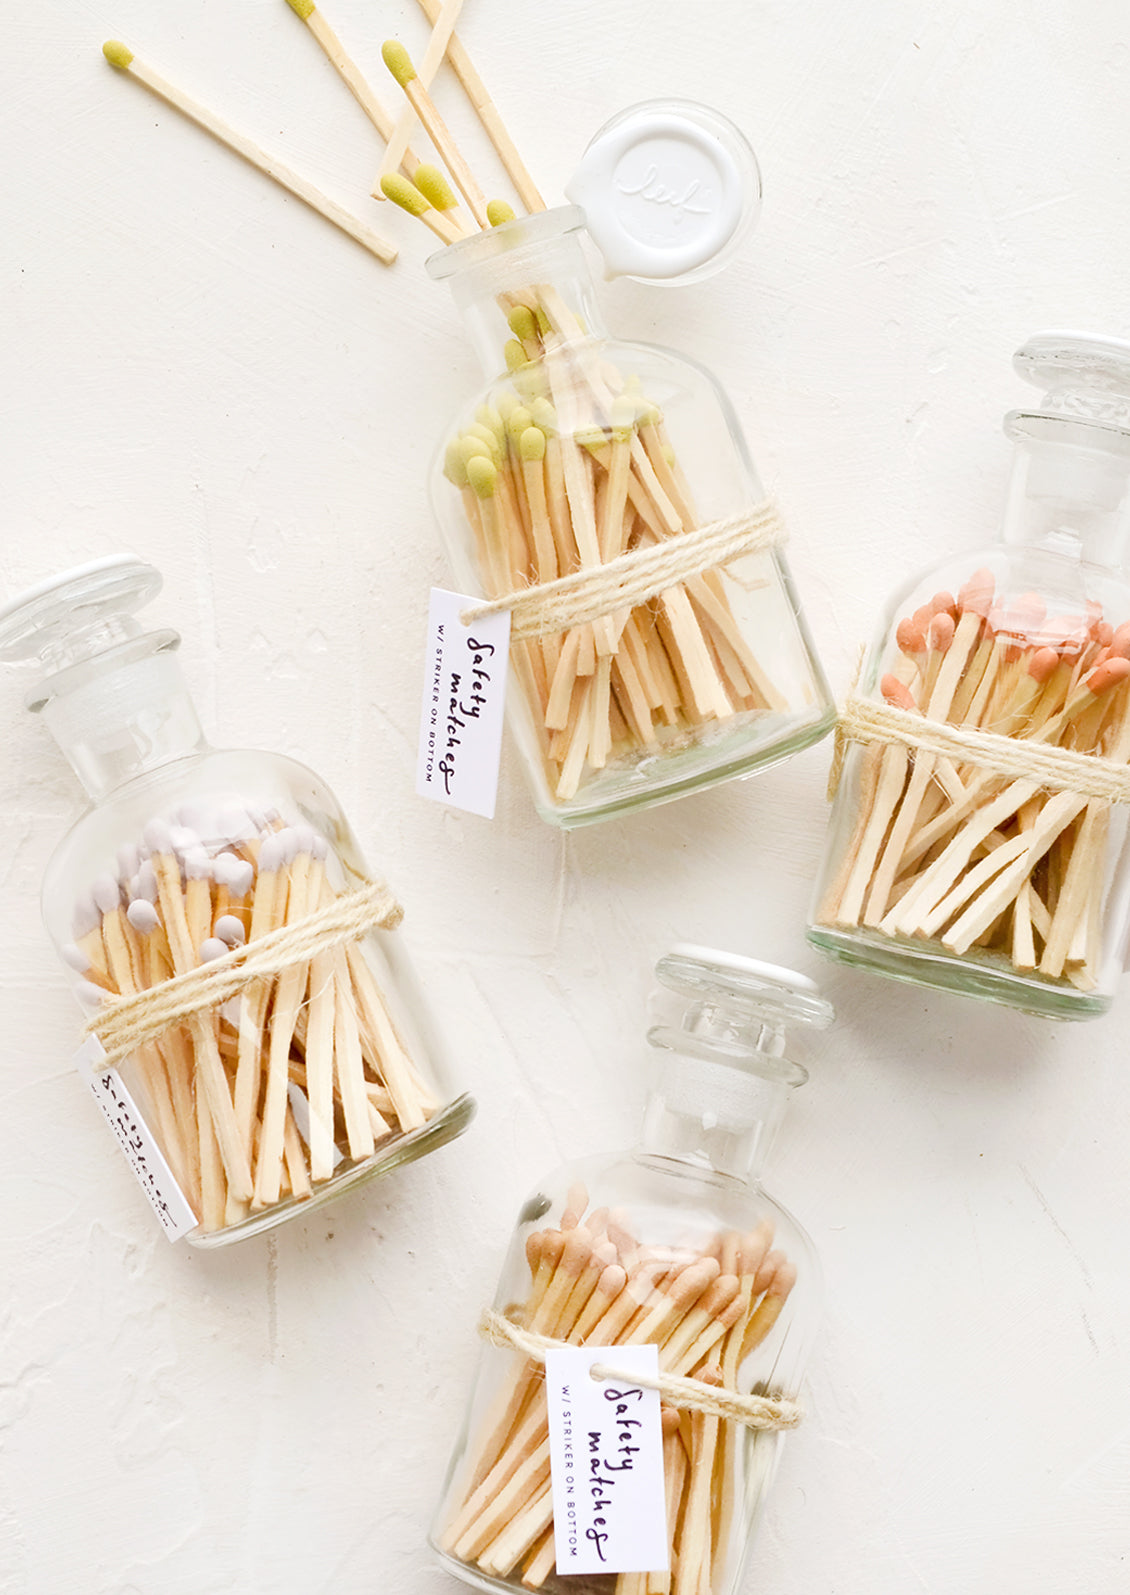 Safety matches in vintage style glass apothecary jars, with four match tip color options.